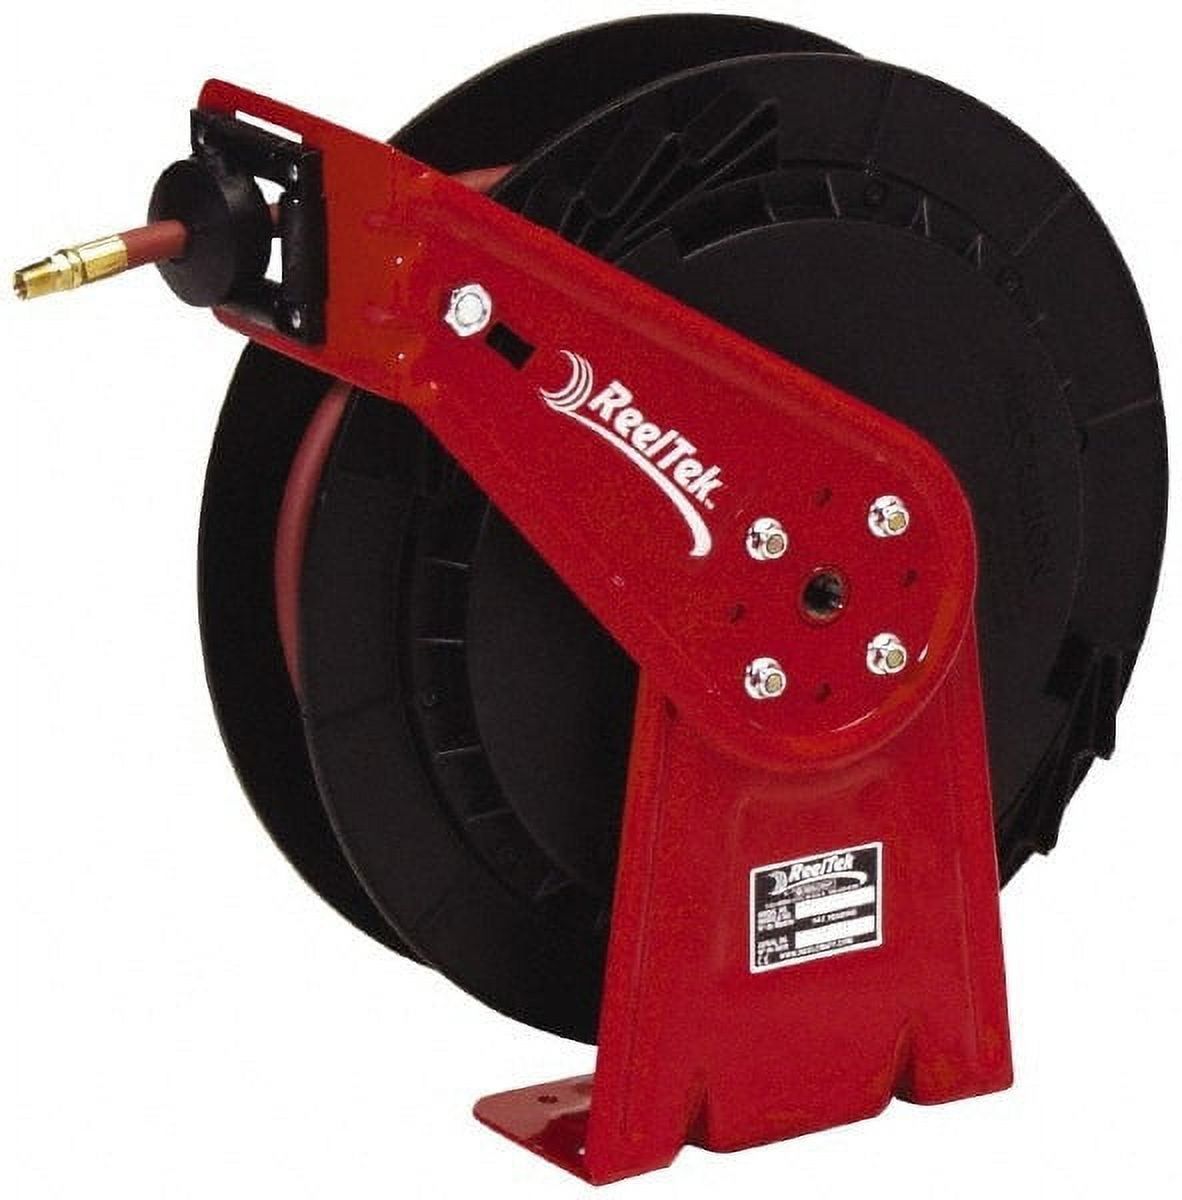 Reelcraft 50' Spring Retractable Hose Reel 300 psi, Hose Included - image 1 of 1